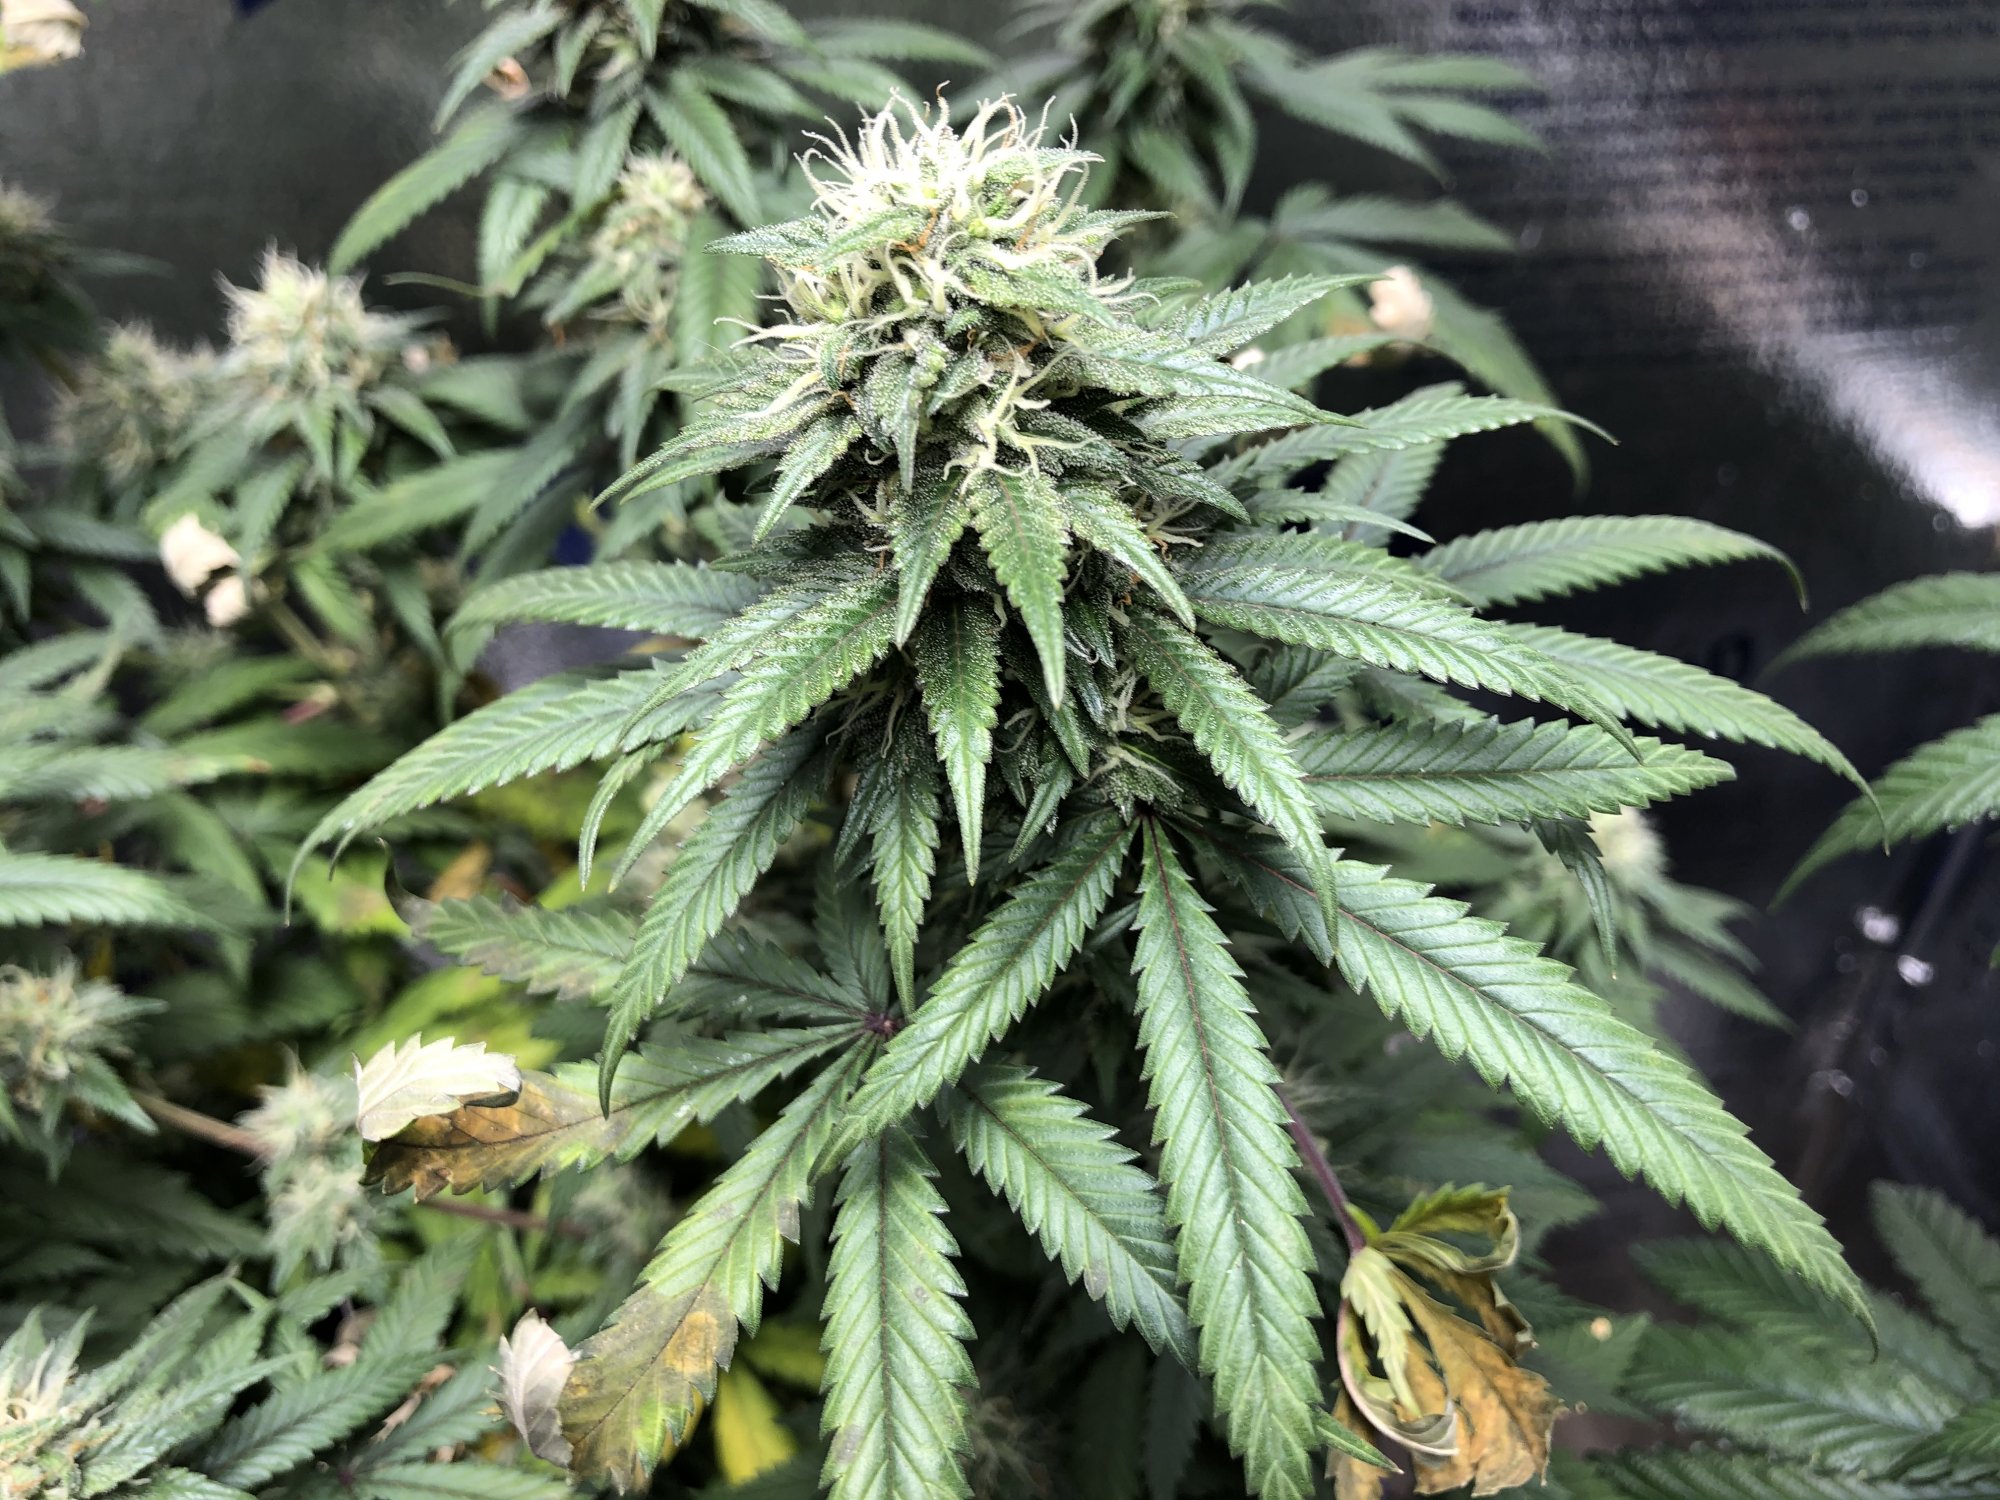 Day 48 flower w nutrient issues advice needed